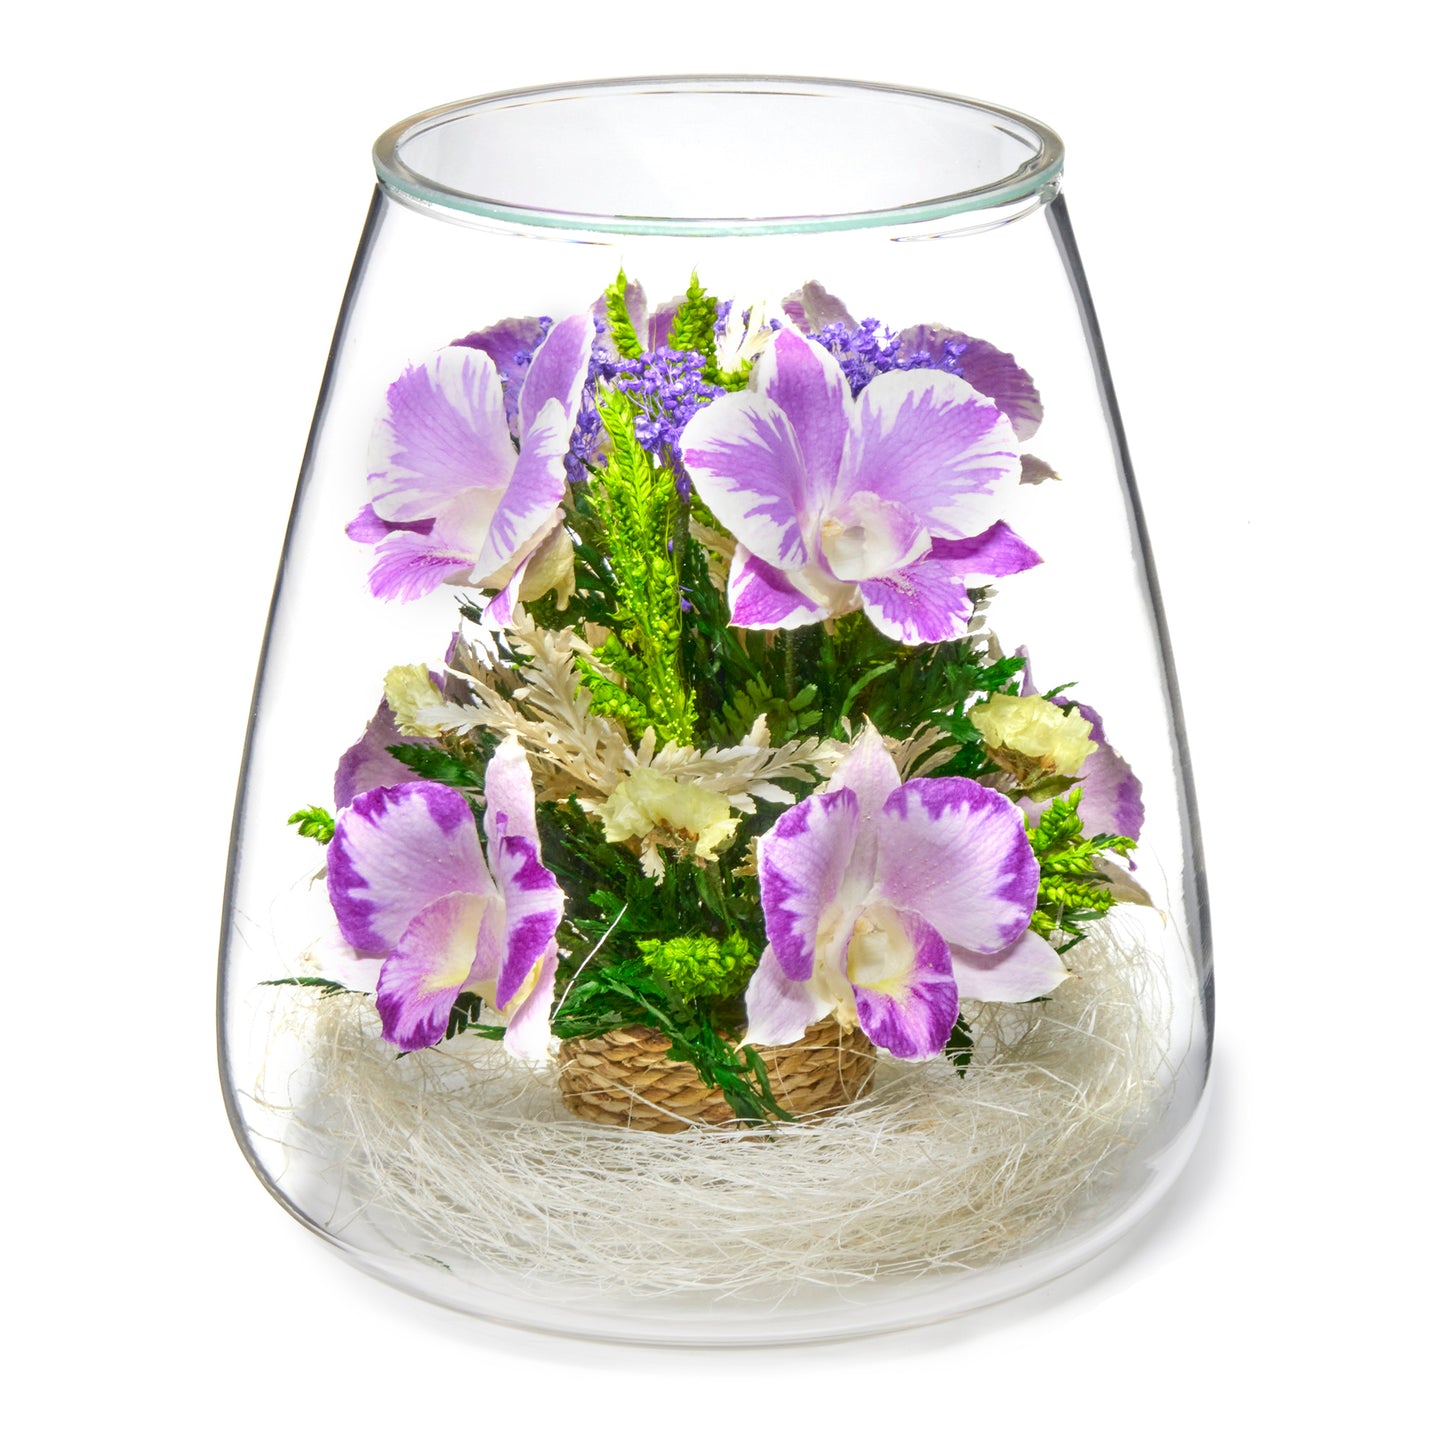 In Flores Veritas: Mystic Orchid Tower - Lasts up to 5 Years - Elegant Gift for Any Occasion